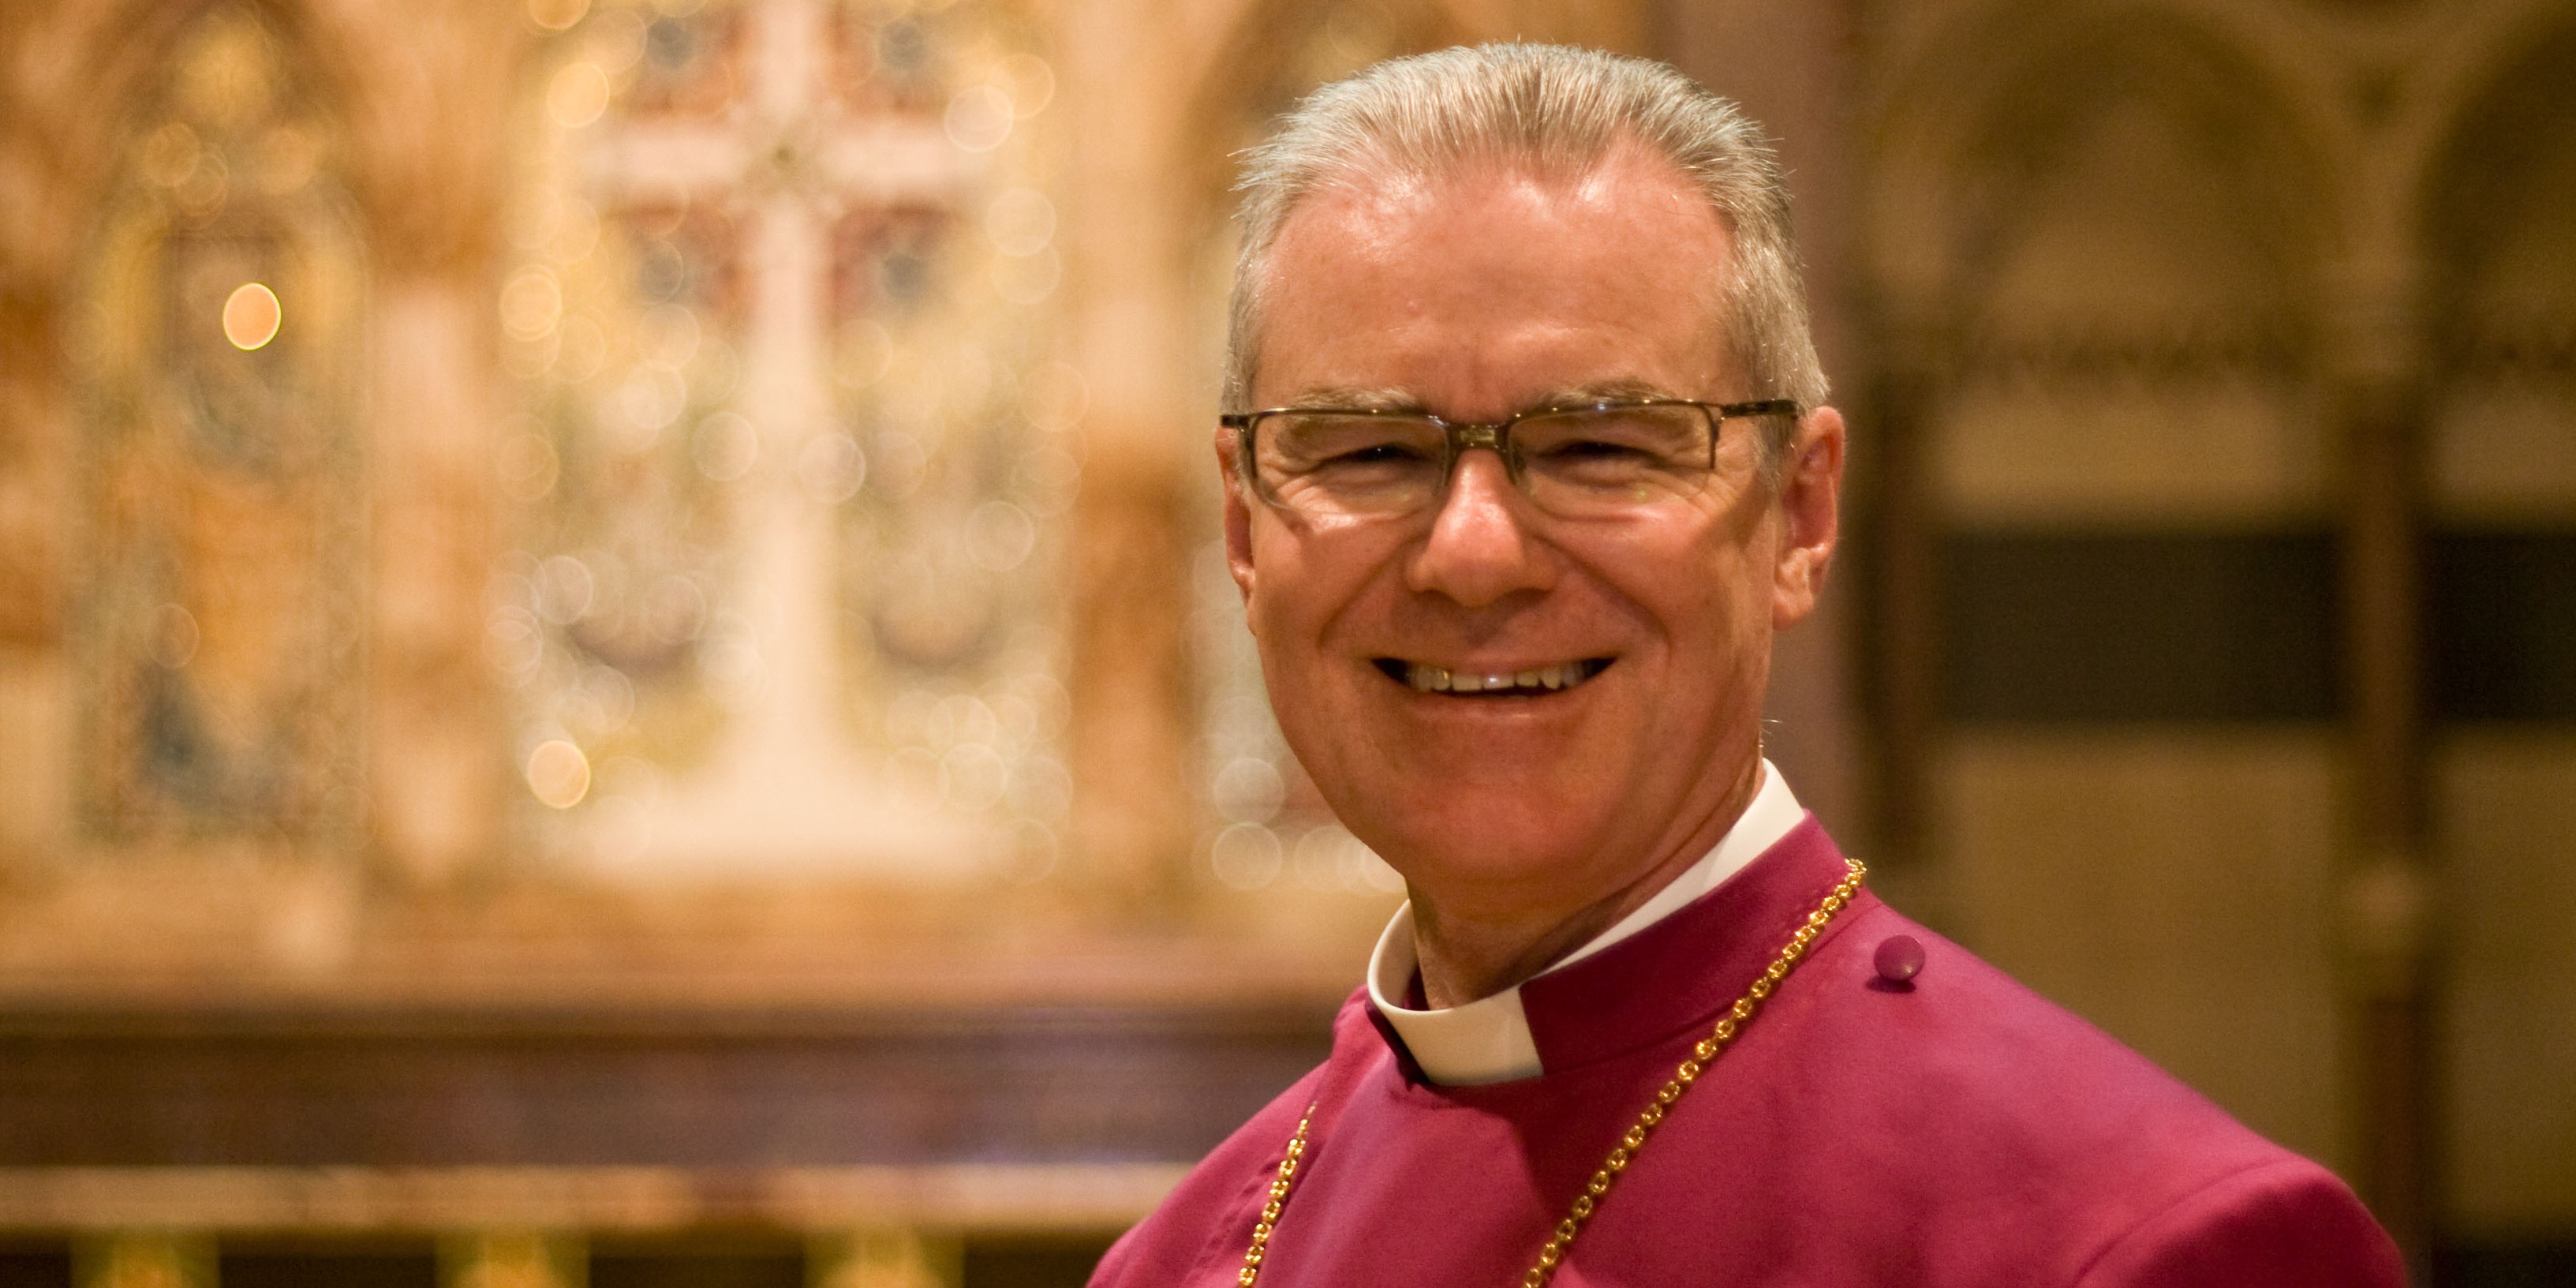 Marriage equality groups divided over Archbishop’s comments